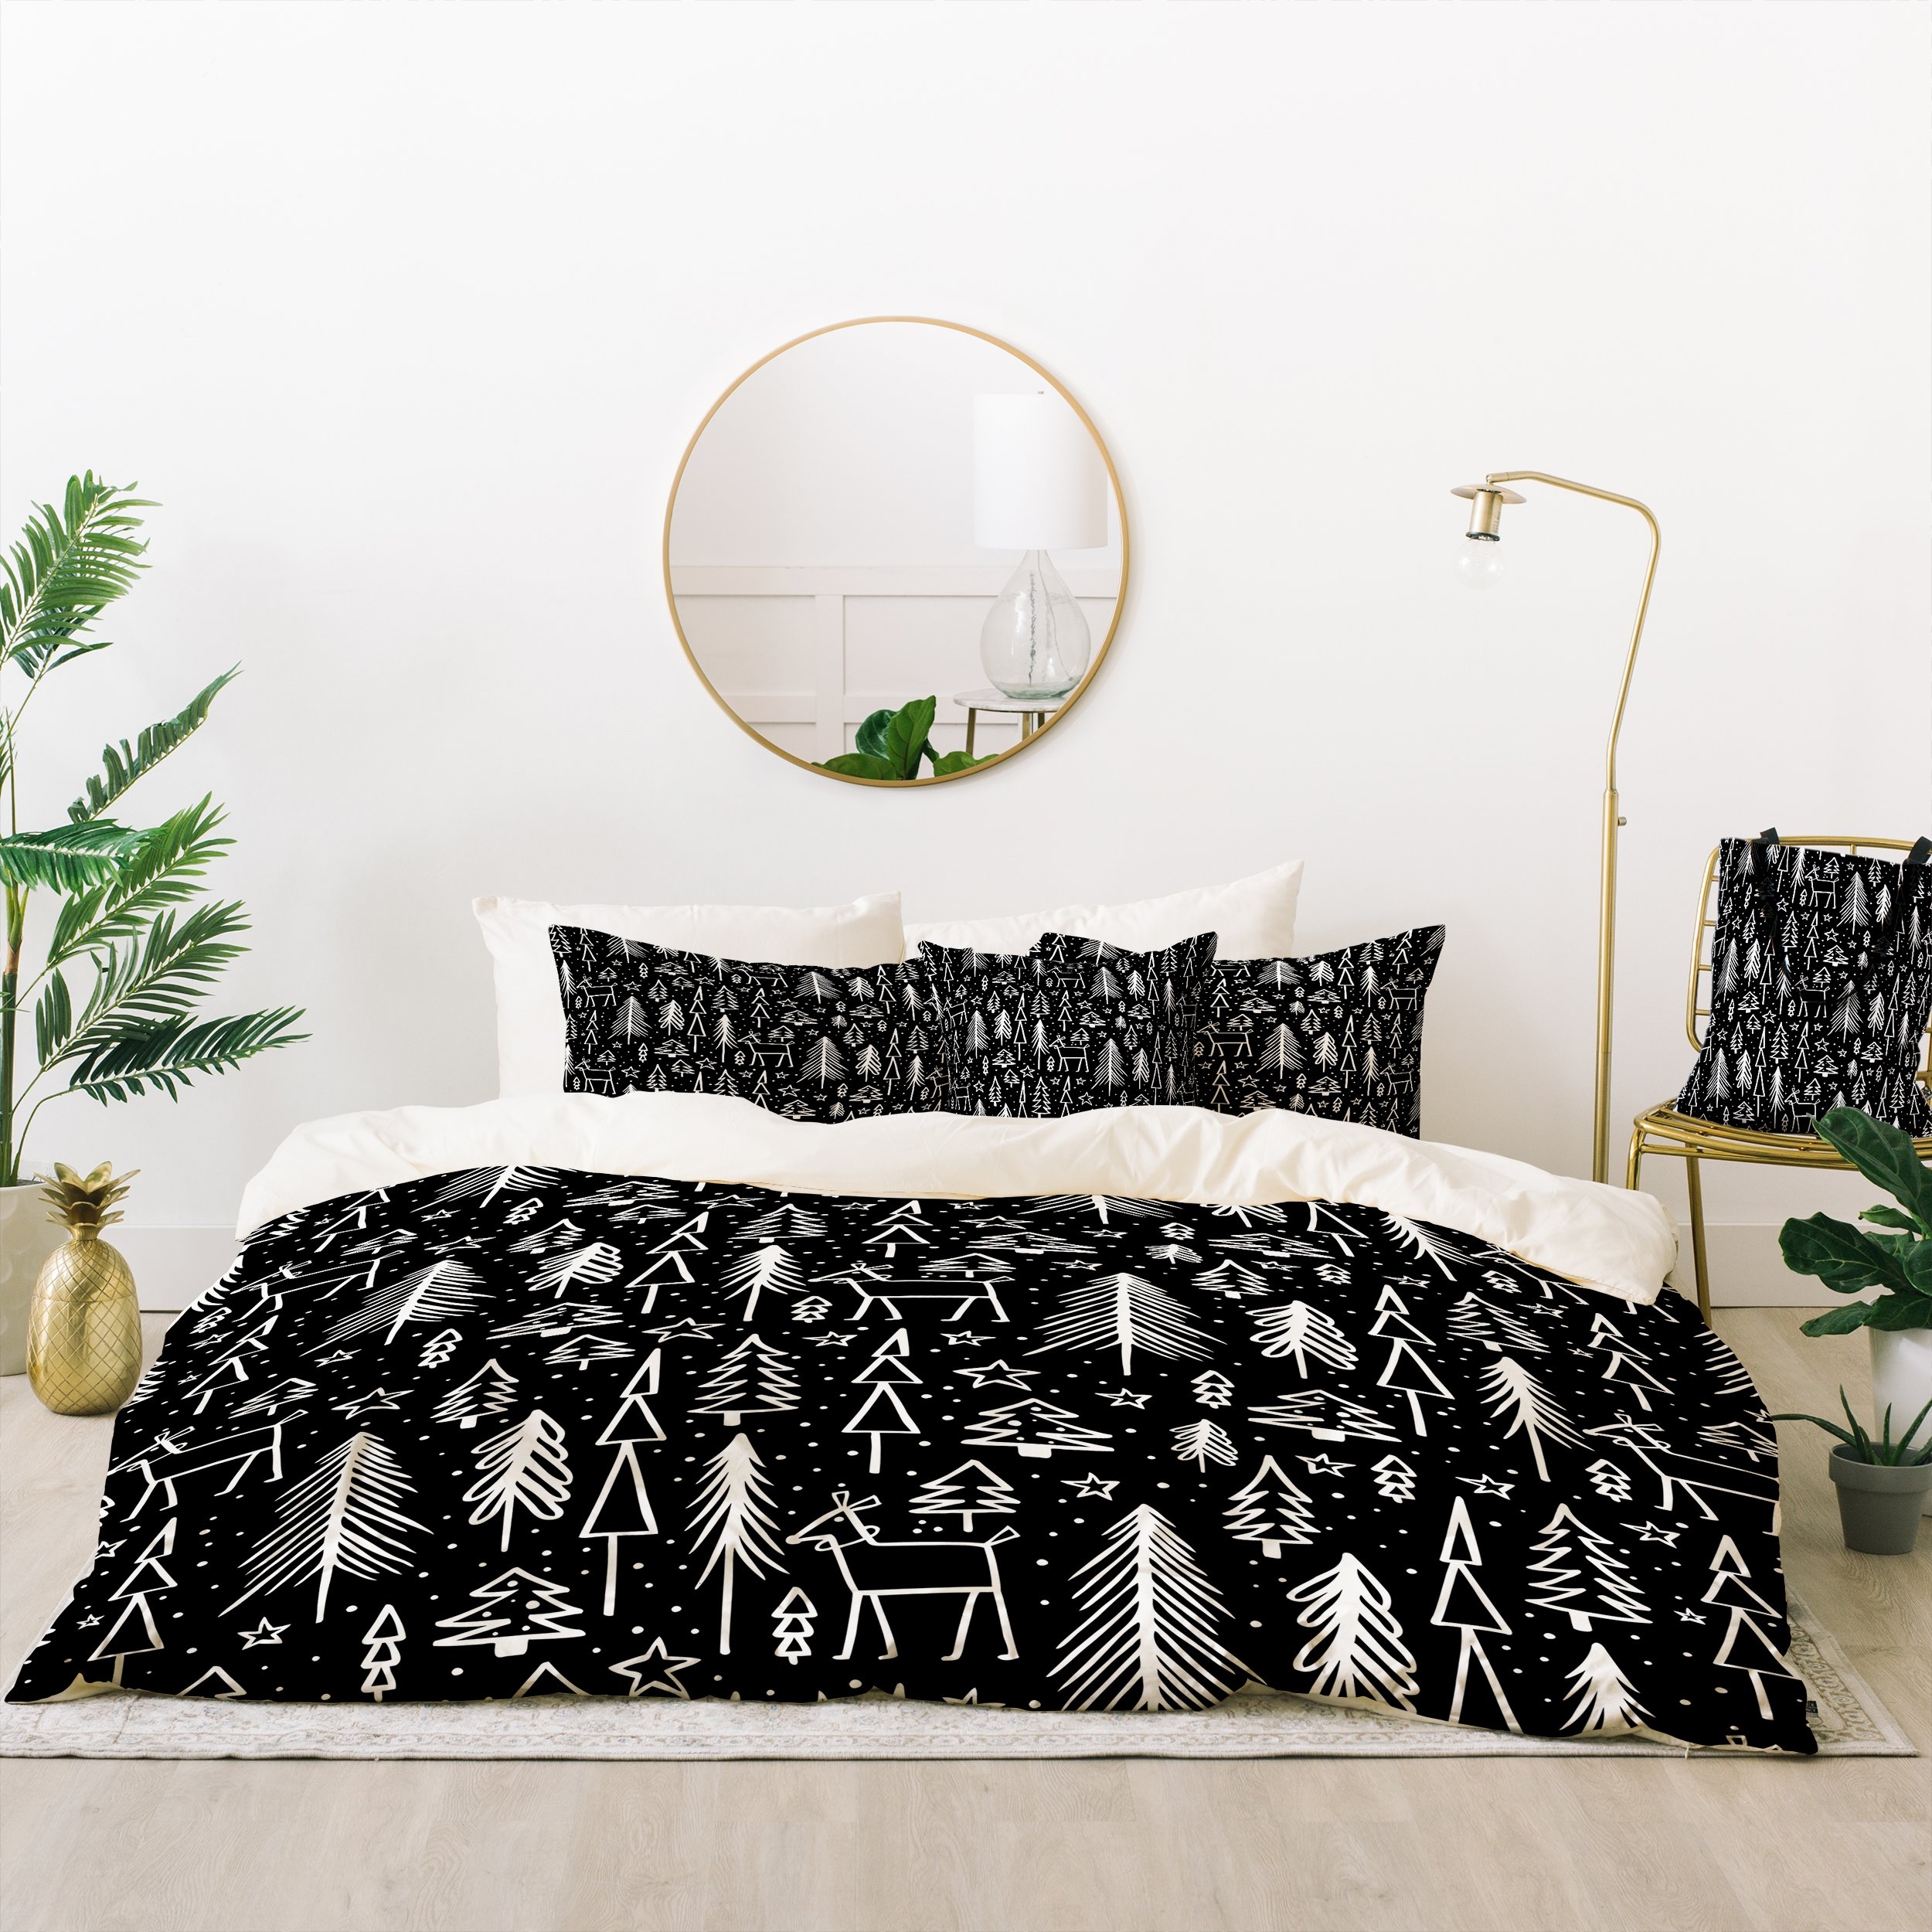 WINTER WONDERLAND BLACK Bed In A Bag - Twin/Twin XL - Image 0